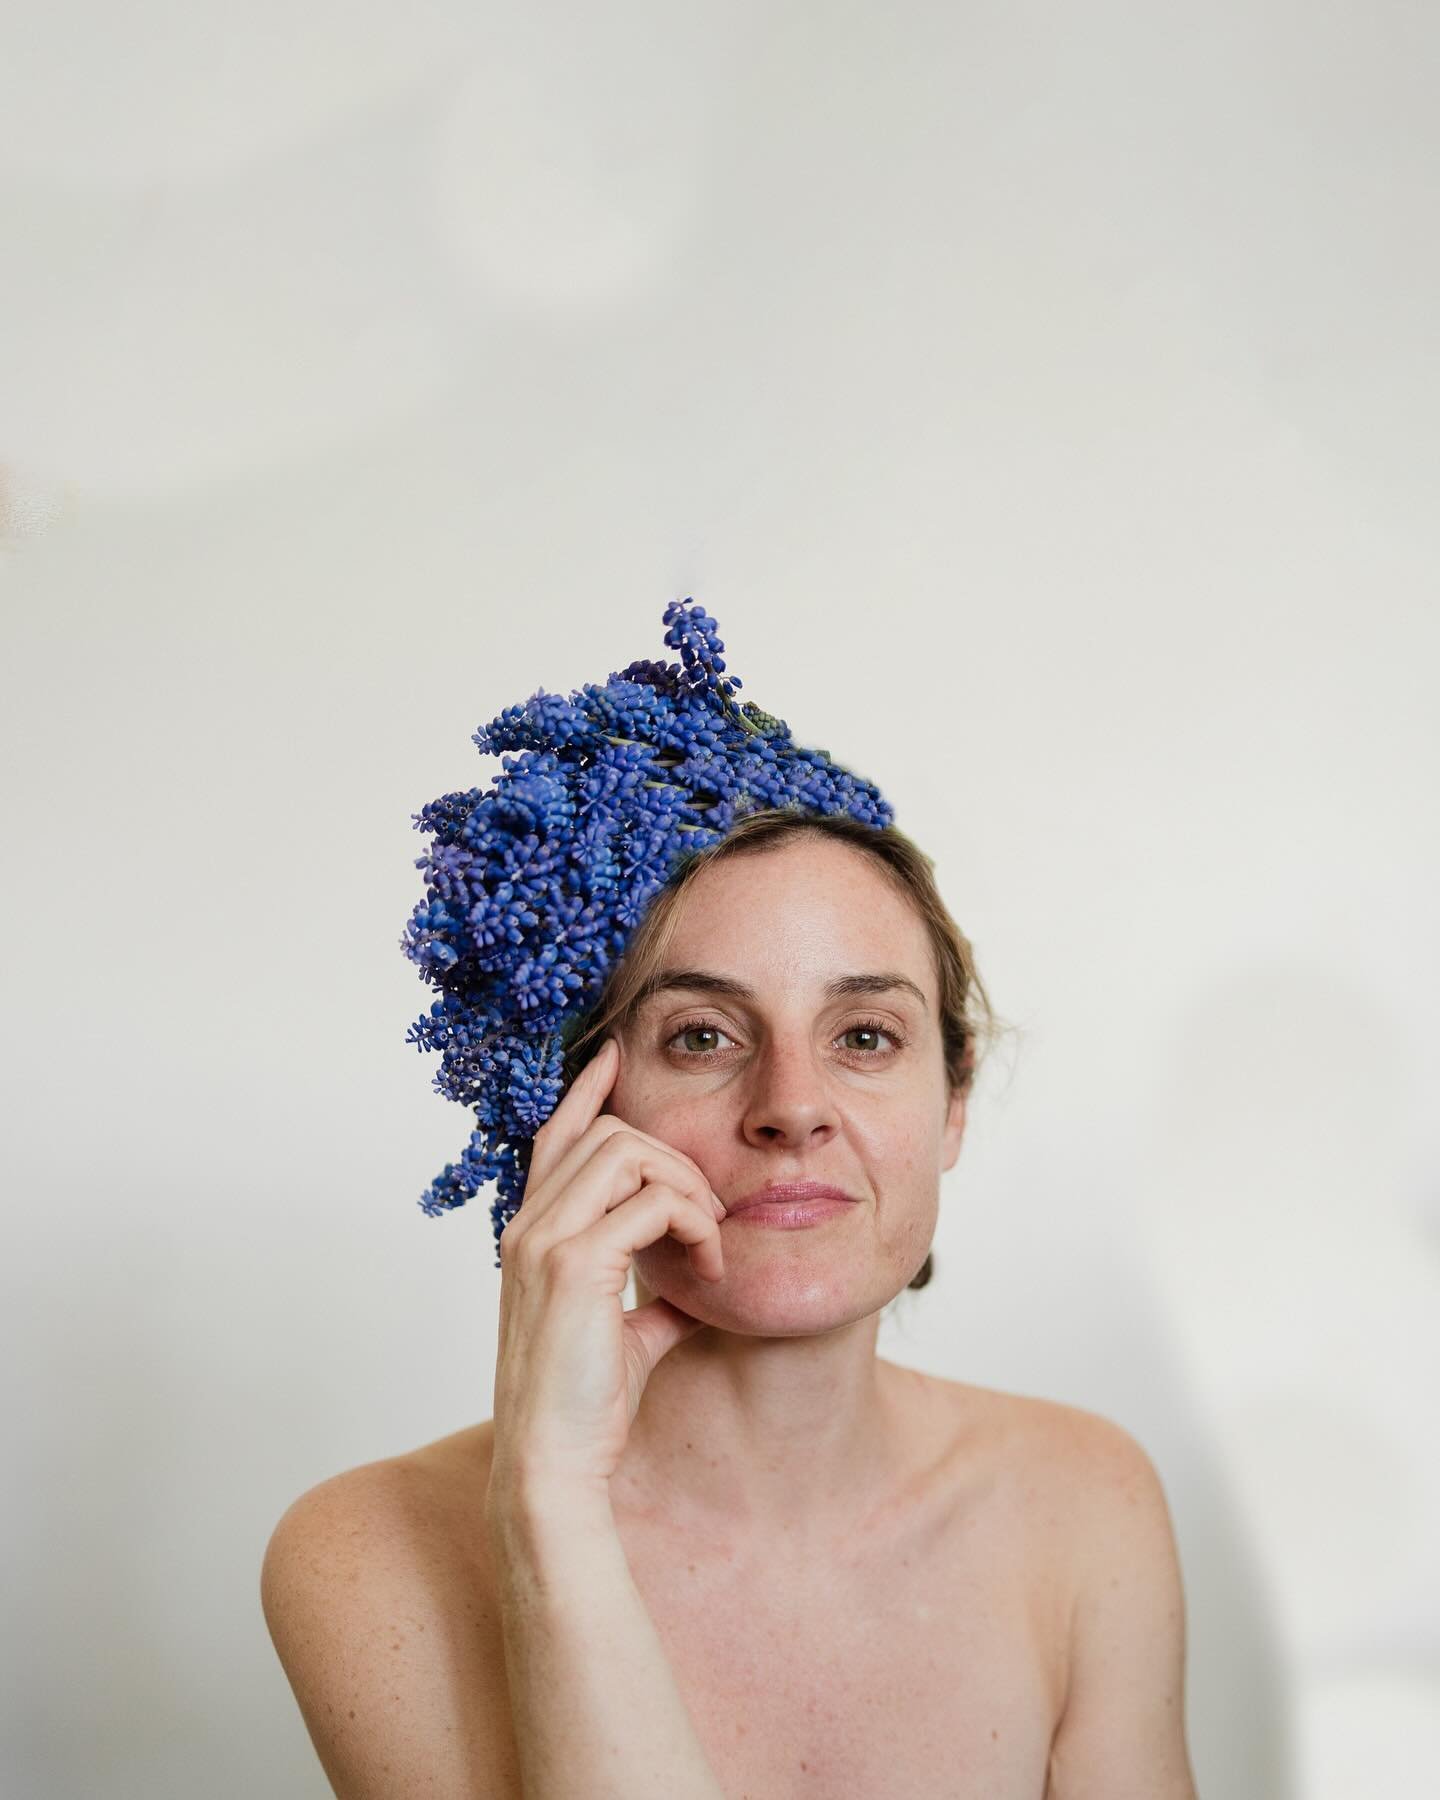 2024 wearable flowers continue: grape hyacinth (thanks @unclejohndavid and @auntcarly for the flowers) half headbands / wig! I love loooove loved making this one! Who has ideas for upcoming blooms: lily of the valley (😍), peonies (😍😍),and bachelor